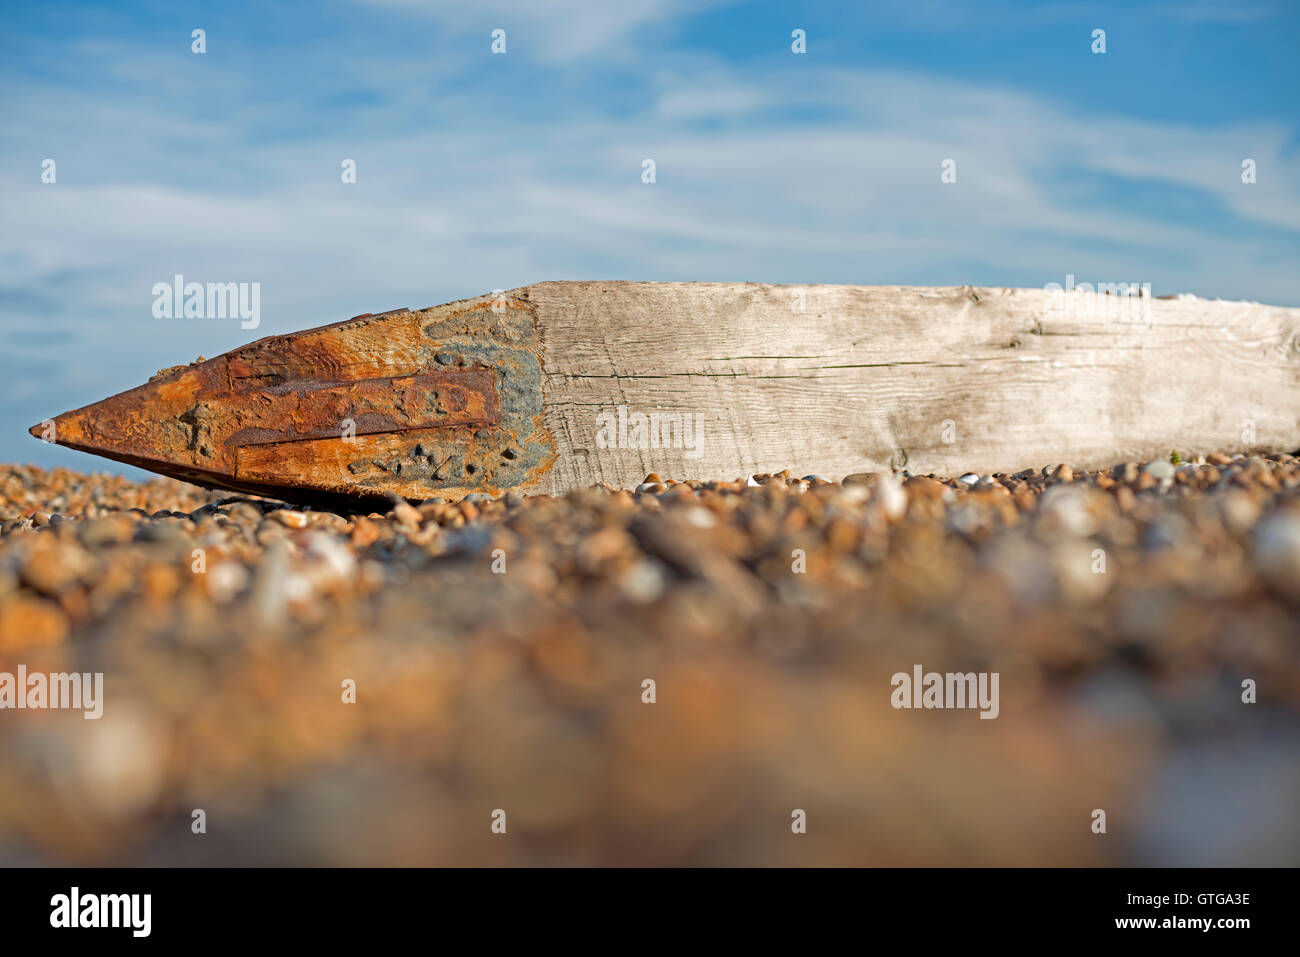 Wooden groyne (100 years old) laying on beach due to coastal erosion Bawdsey Ferry Suffolk UK Stock Photo